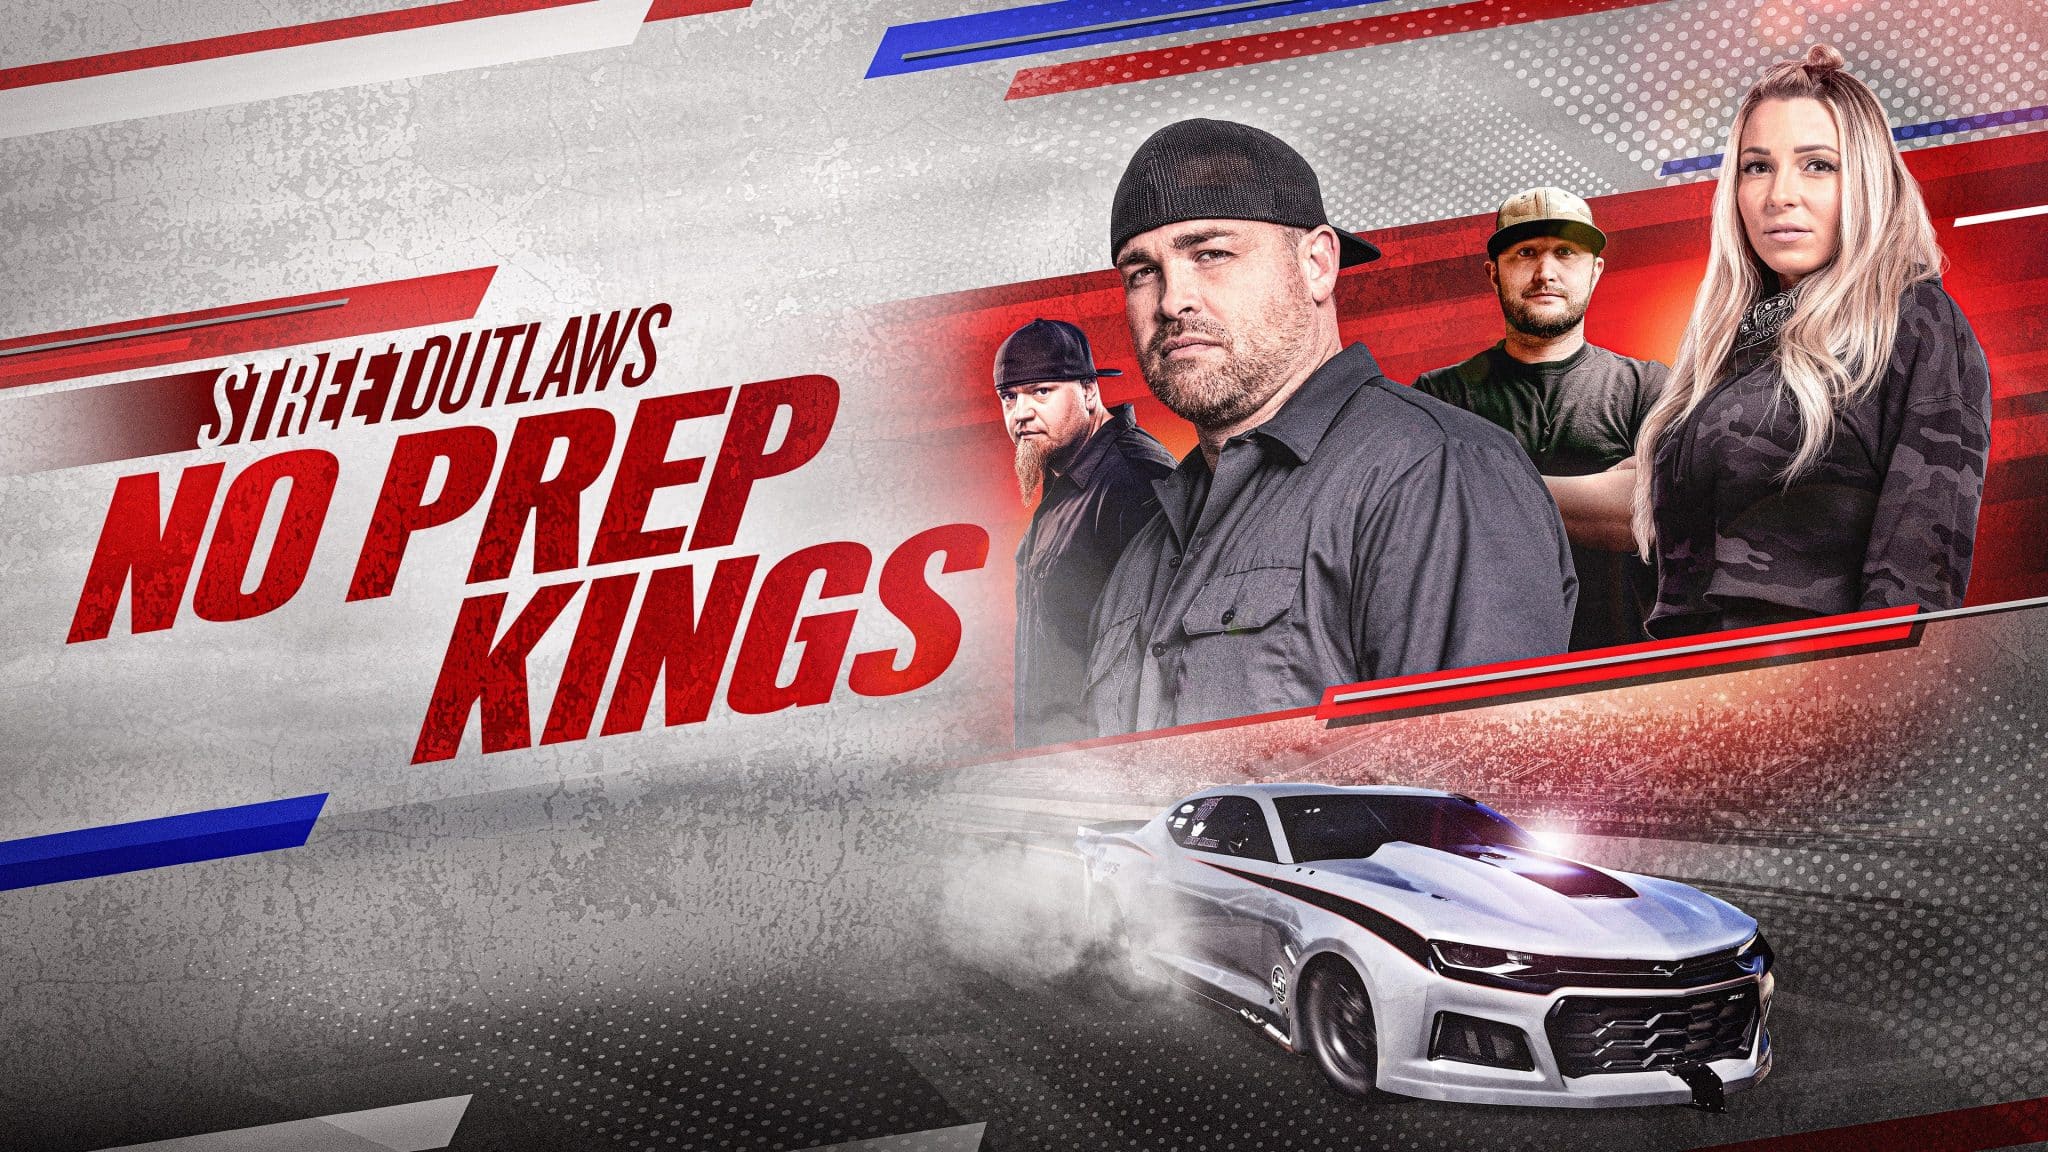 STREET OUTLAWS NO PREP KINGS SCHEDULE LEAKED AND SETTING THE INTERNET